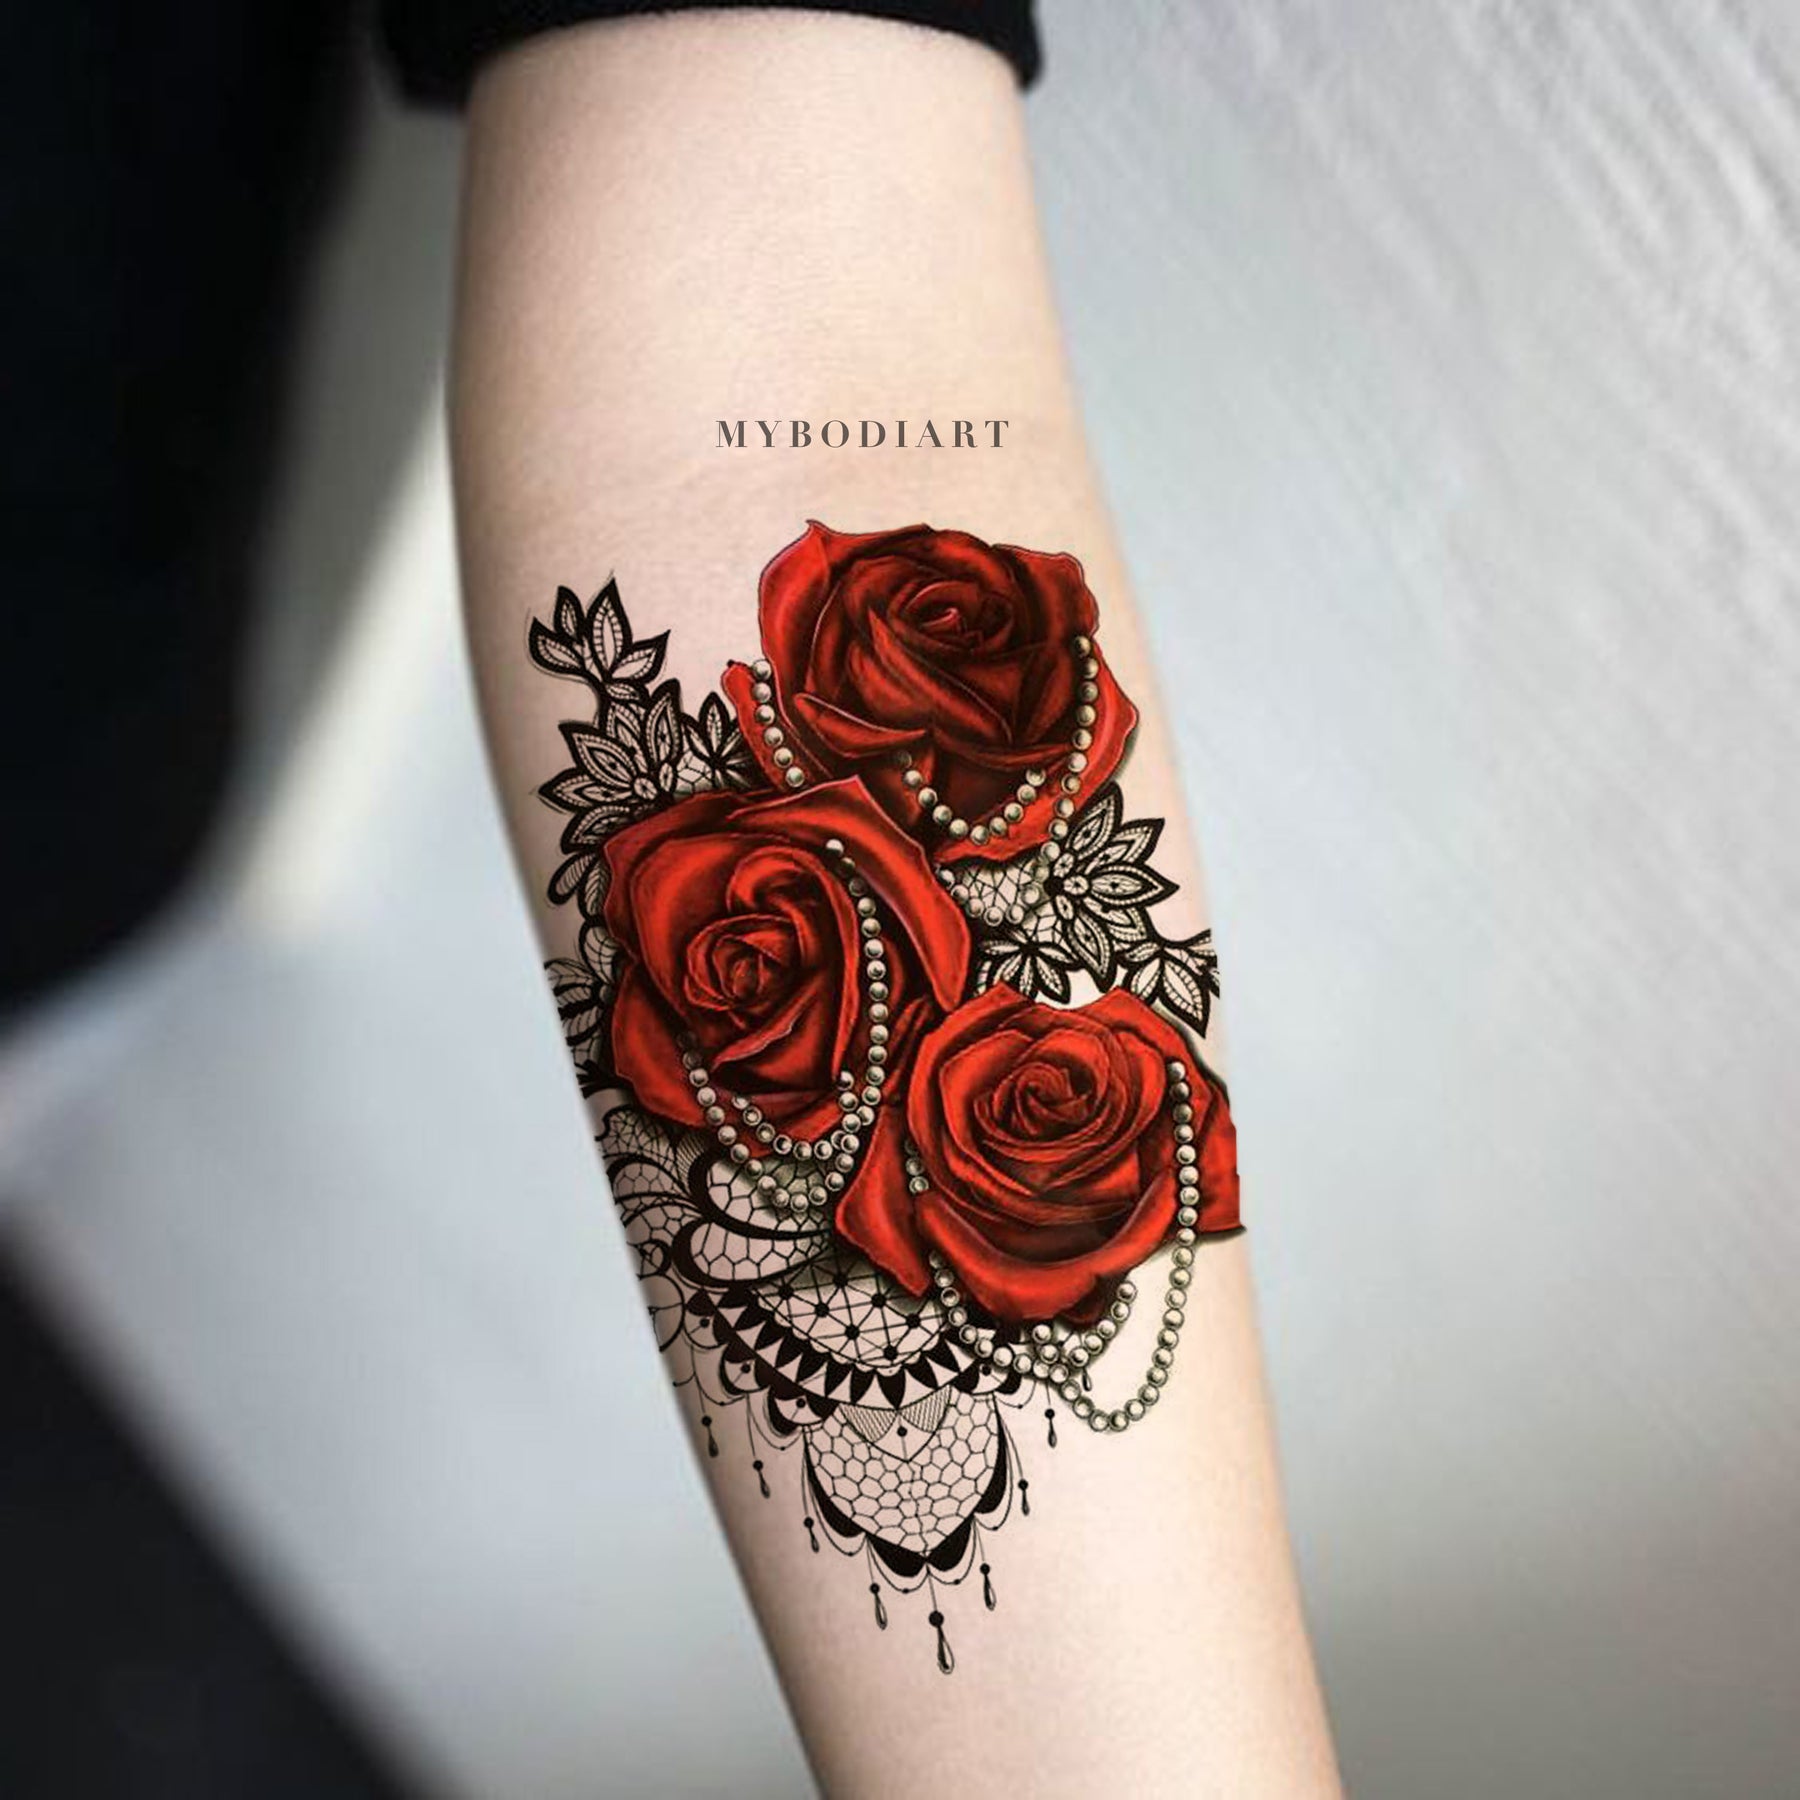 Sexy Flower Rose Lace Temporary Tattoos Sticker For Women Fake Girls  Waterproof Tattoo Paper Body Arm Art Tatoos Chains Jewelry  Temporary  Tattoos  AliExpress